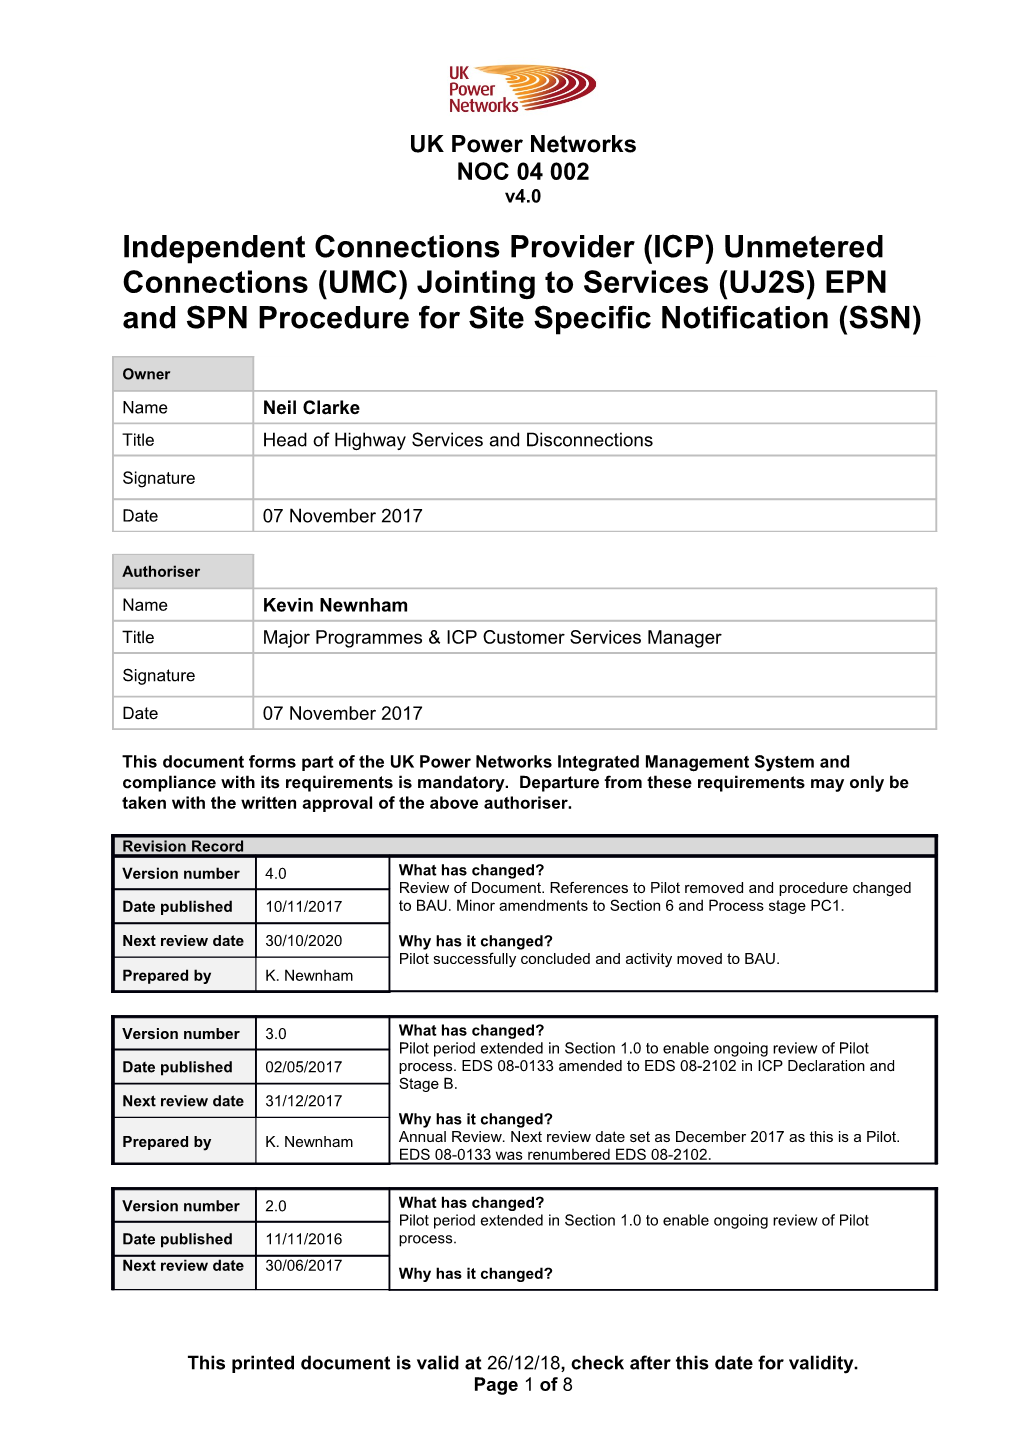 NOC 04 002 Independent Connections Provider (ICP) Unmetered Connections